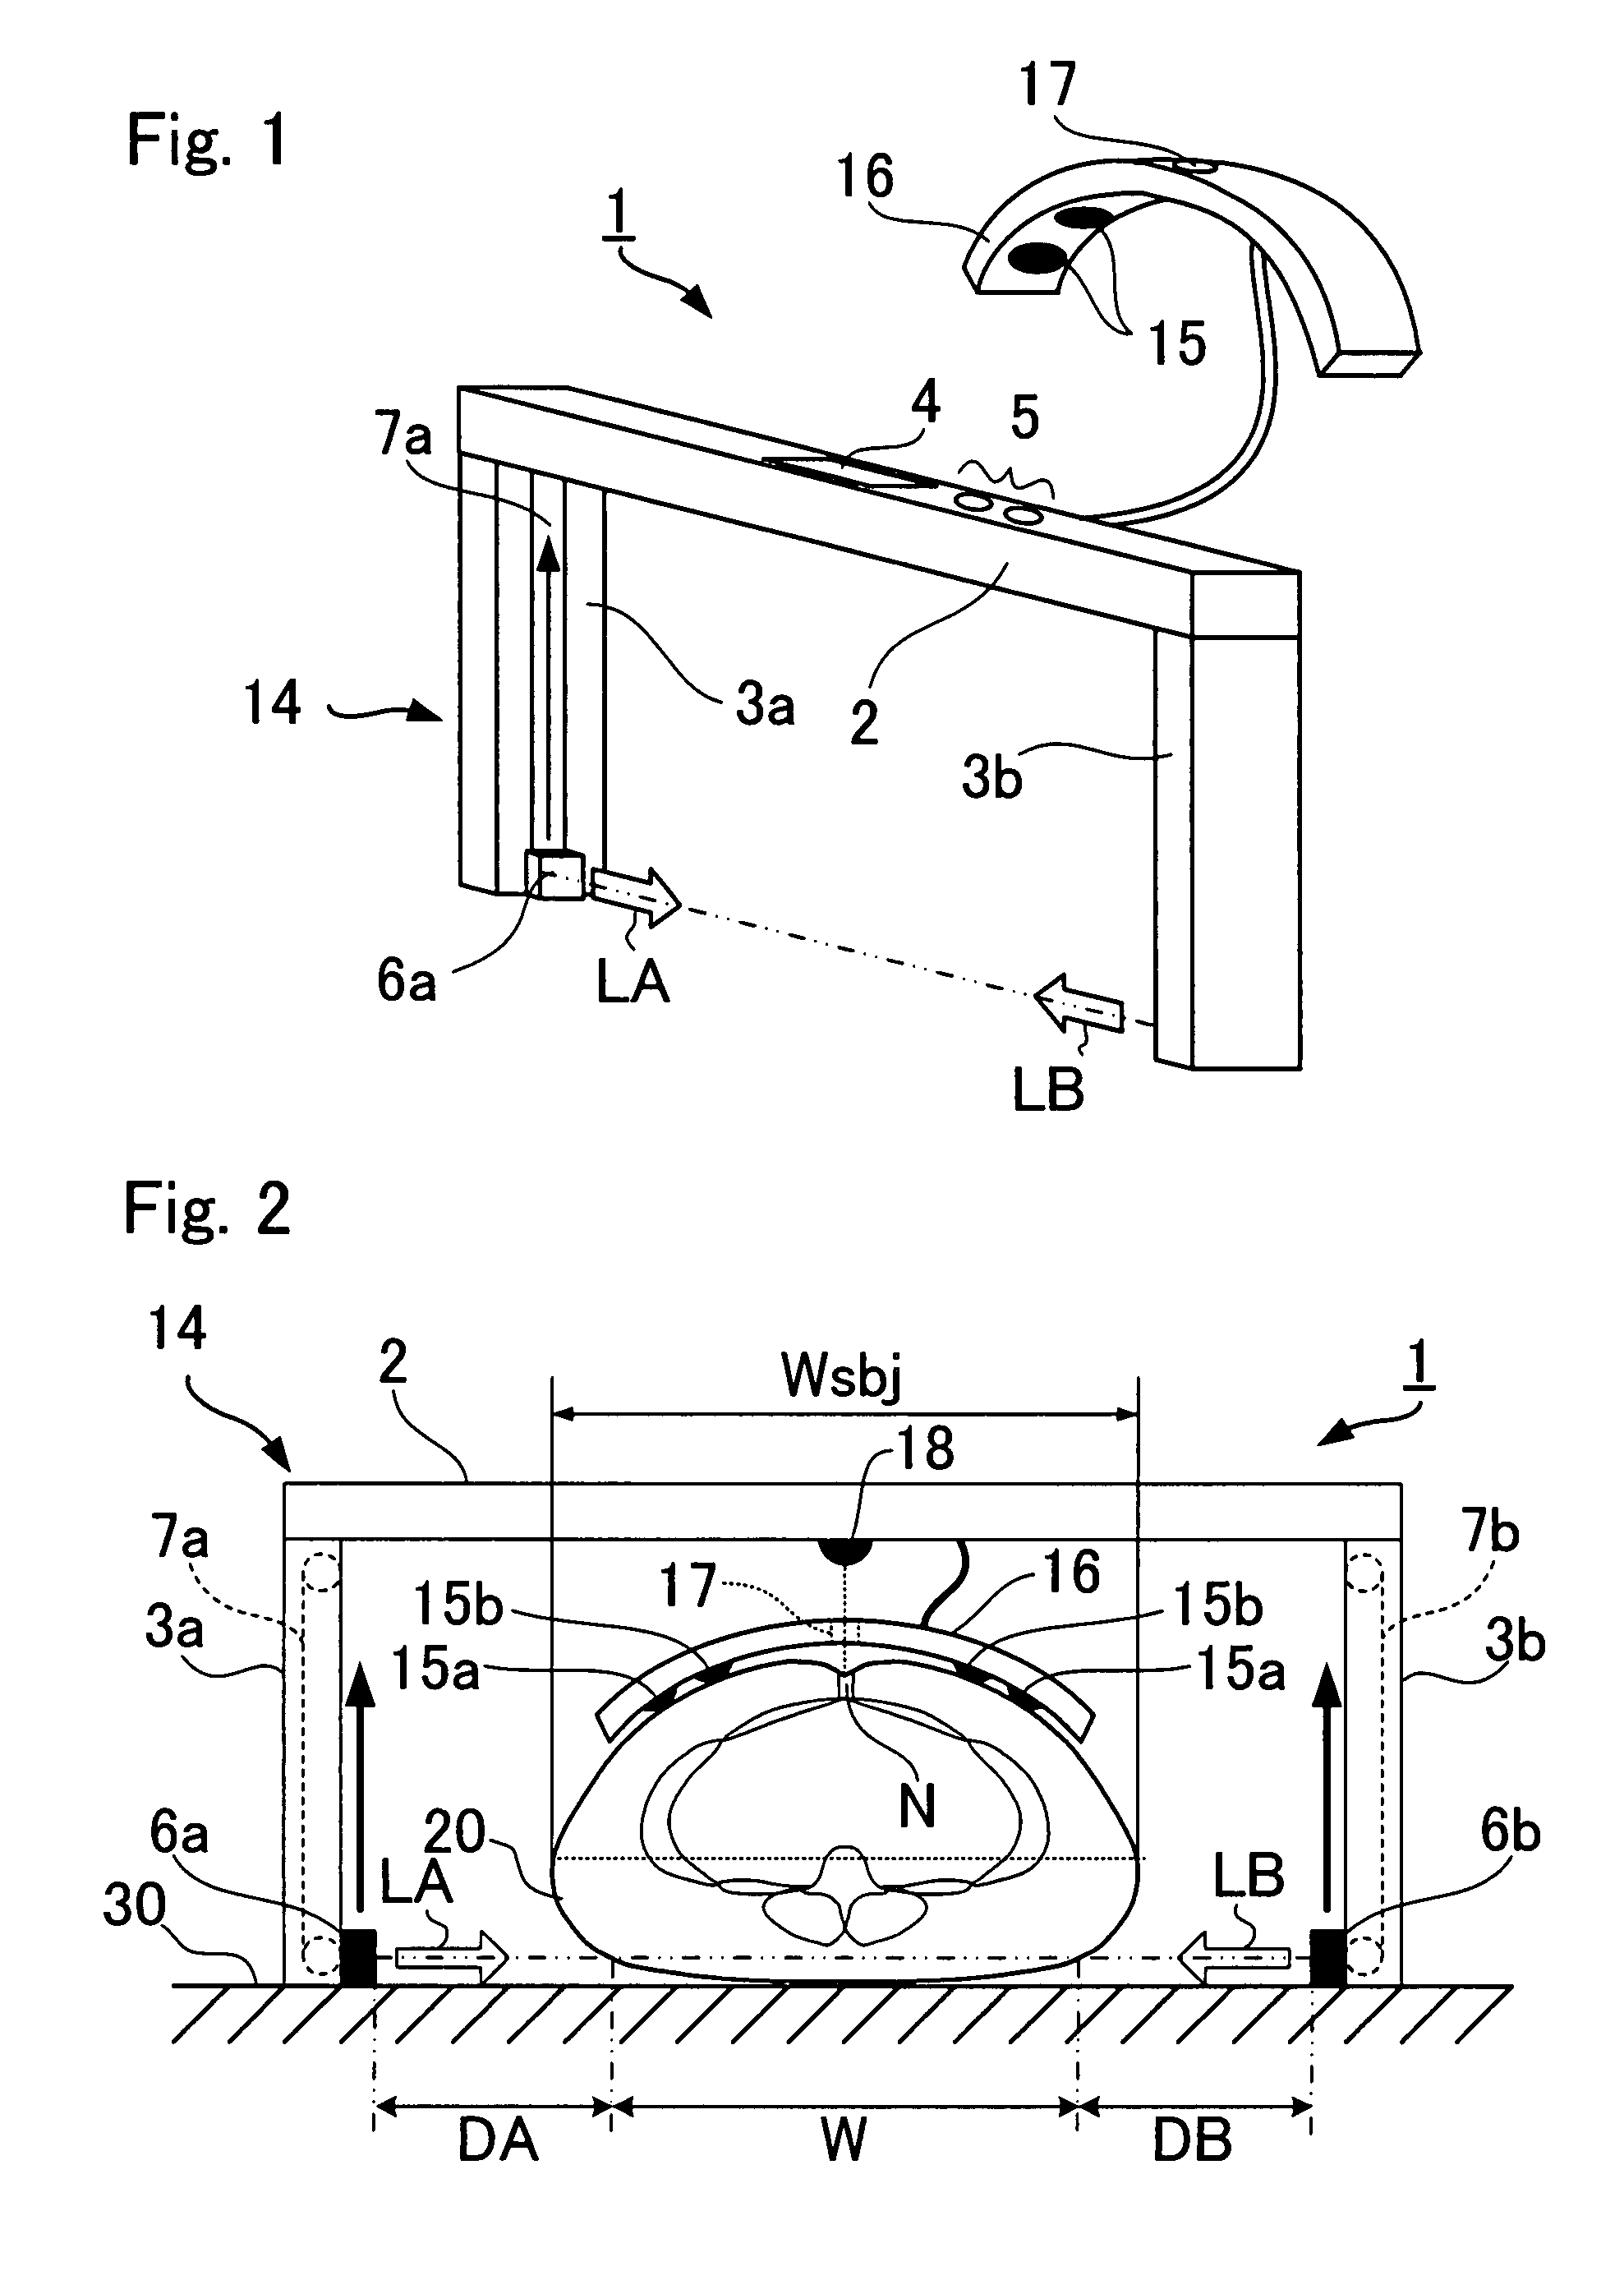 Waist circumference calculation apparatus and body composition determination apparatus